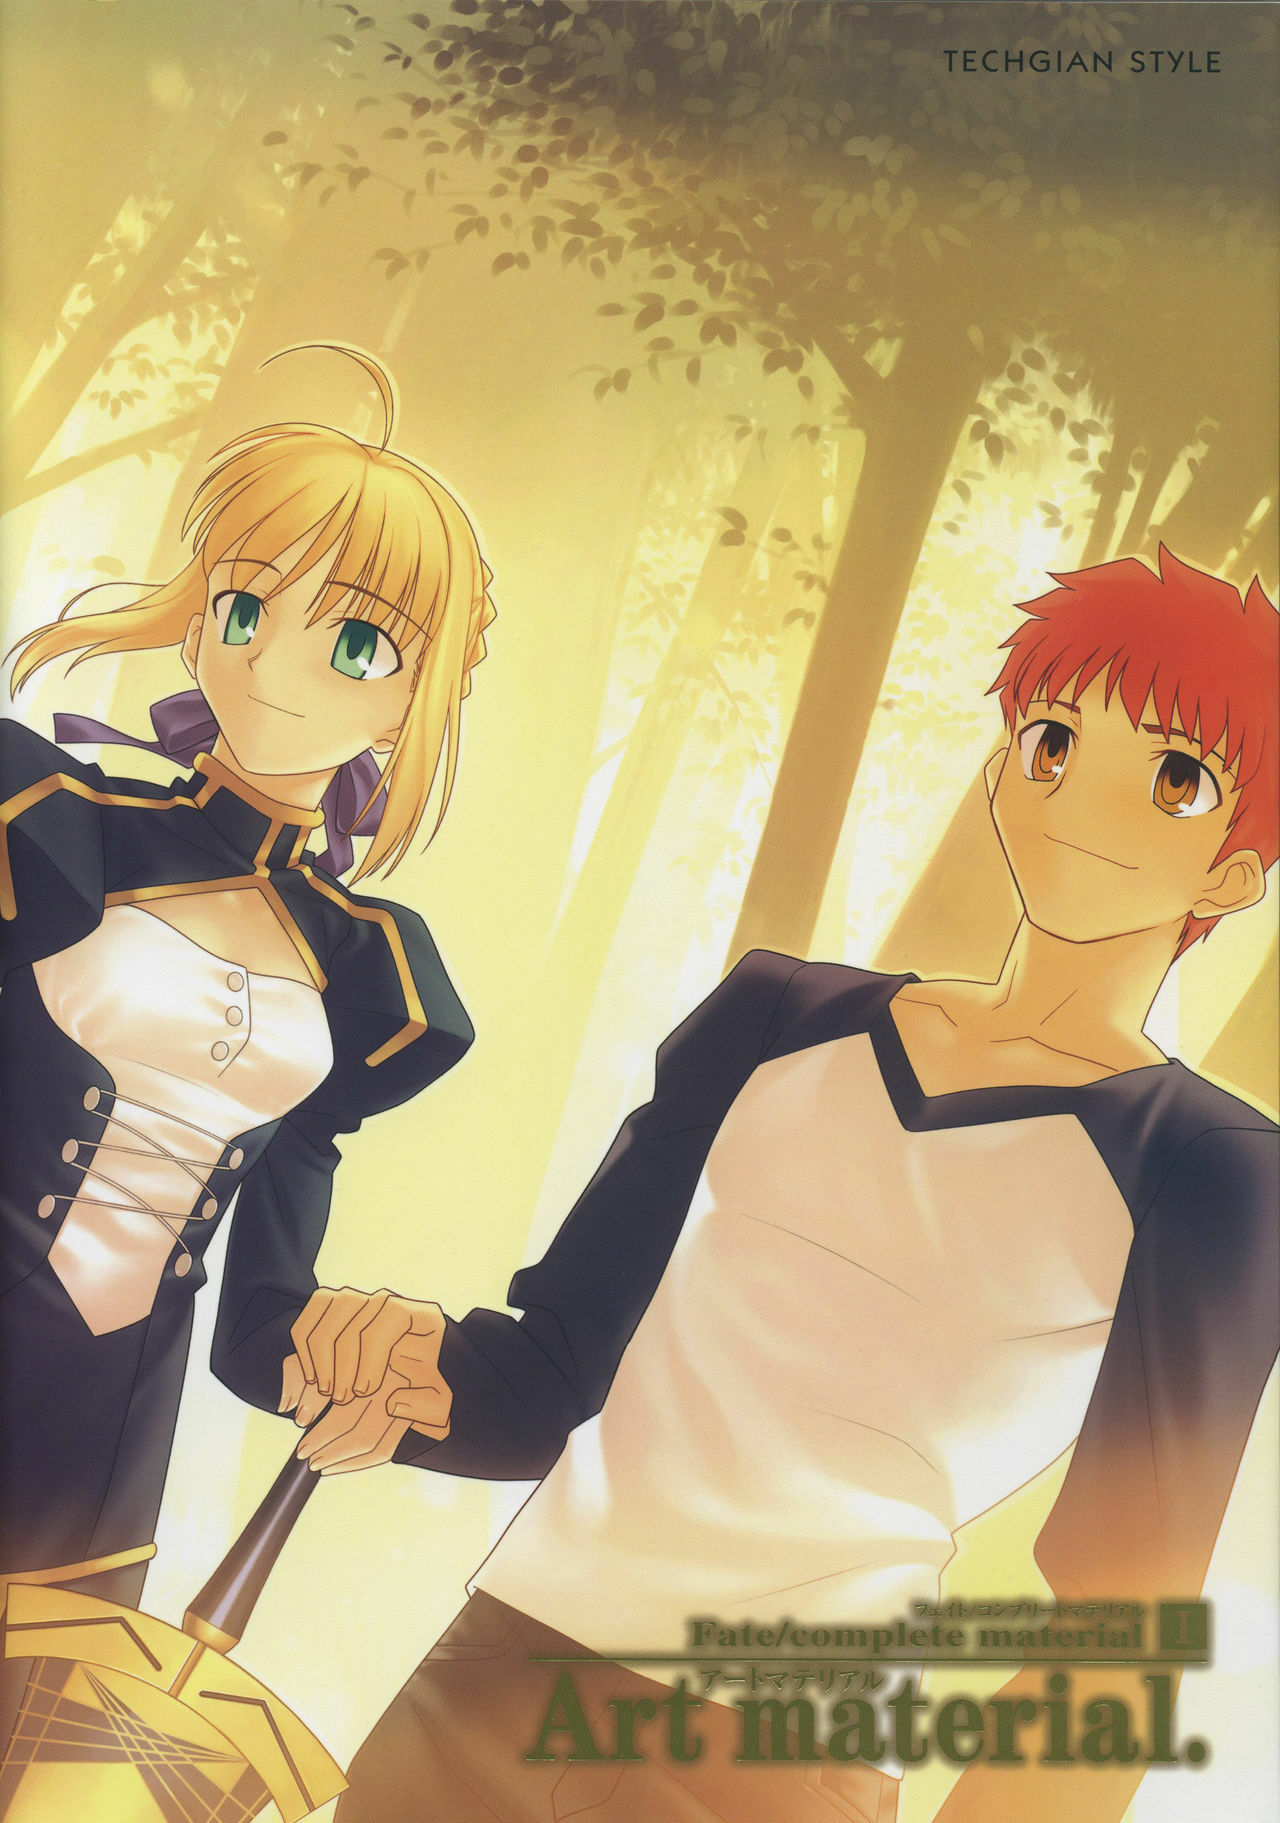 [Type-Moon] Fate/complete material I - Art material. page 1 full